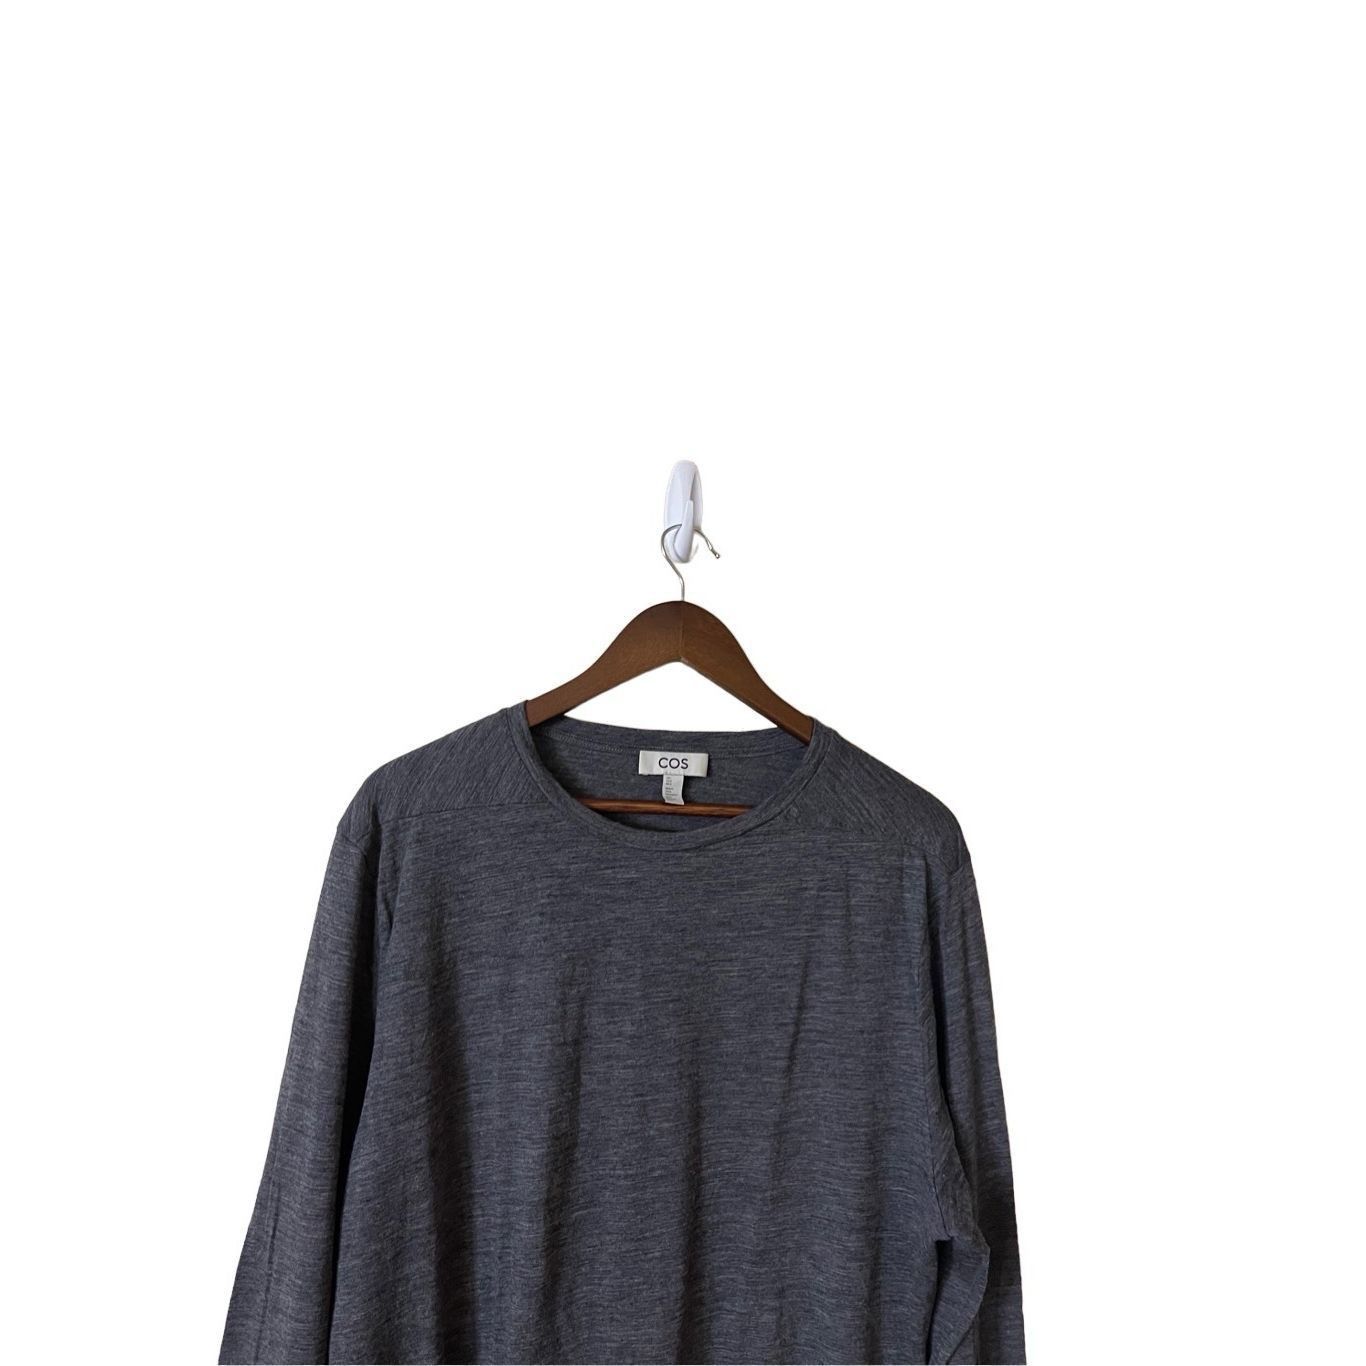 Cos COS 100% Wool Grey Crewneck Long Sleeve Lightweight Sweater Size US L / EU 52-54 / 3 - 11 Preview